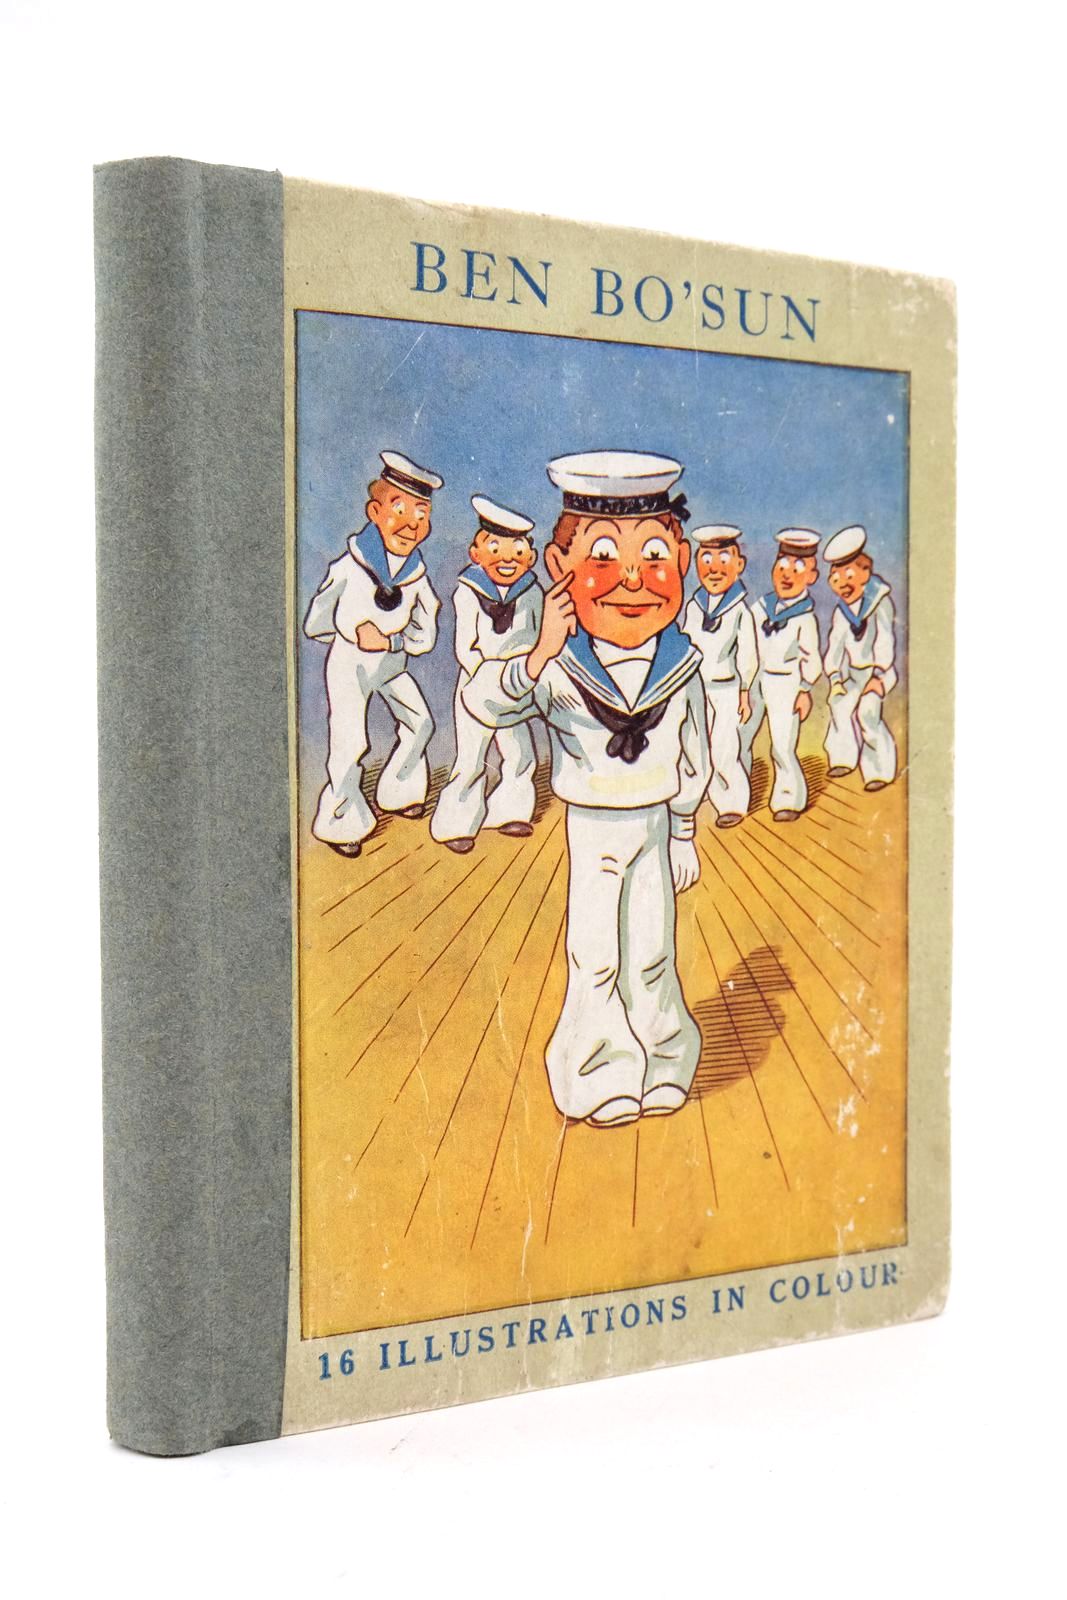 Photo of BEN BO'SUN written by Golding, Harry illustrated by Shepheard, G.E. published by Ward, Lock & Co. Ltd. (STOCK CODE: 2138603)  for sale by Stella & Rose's Books